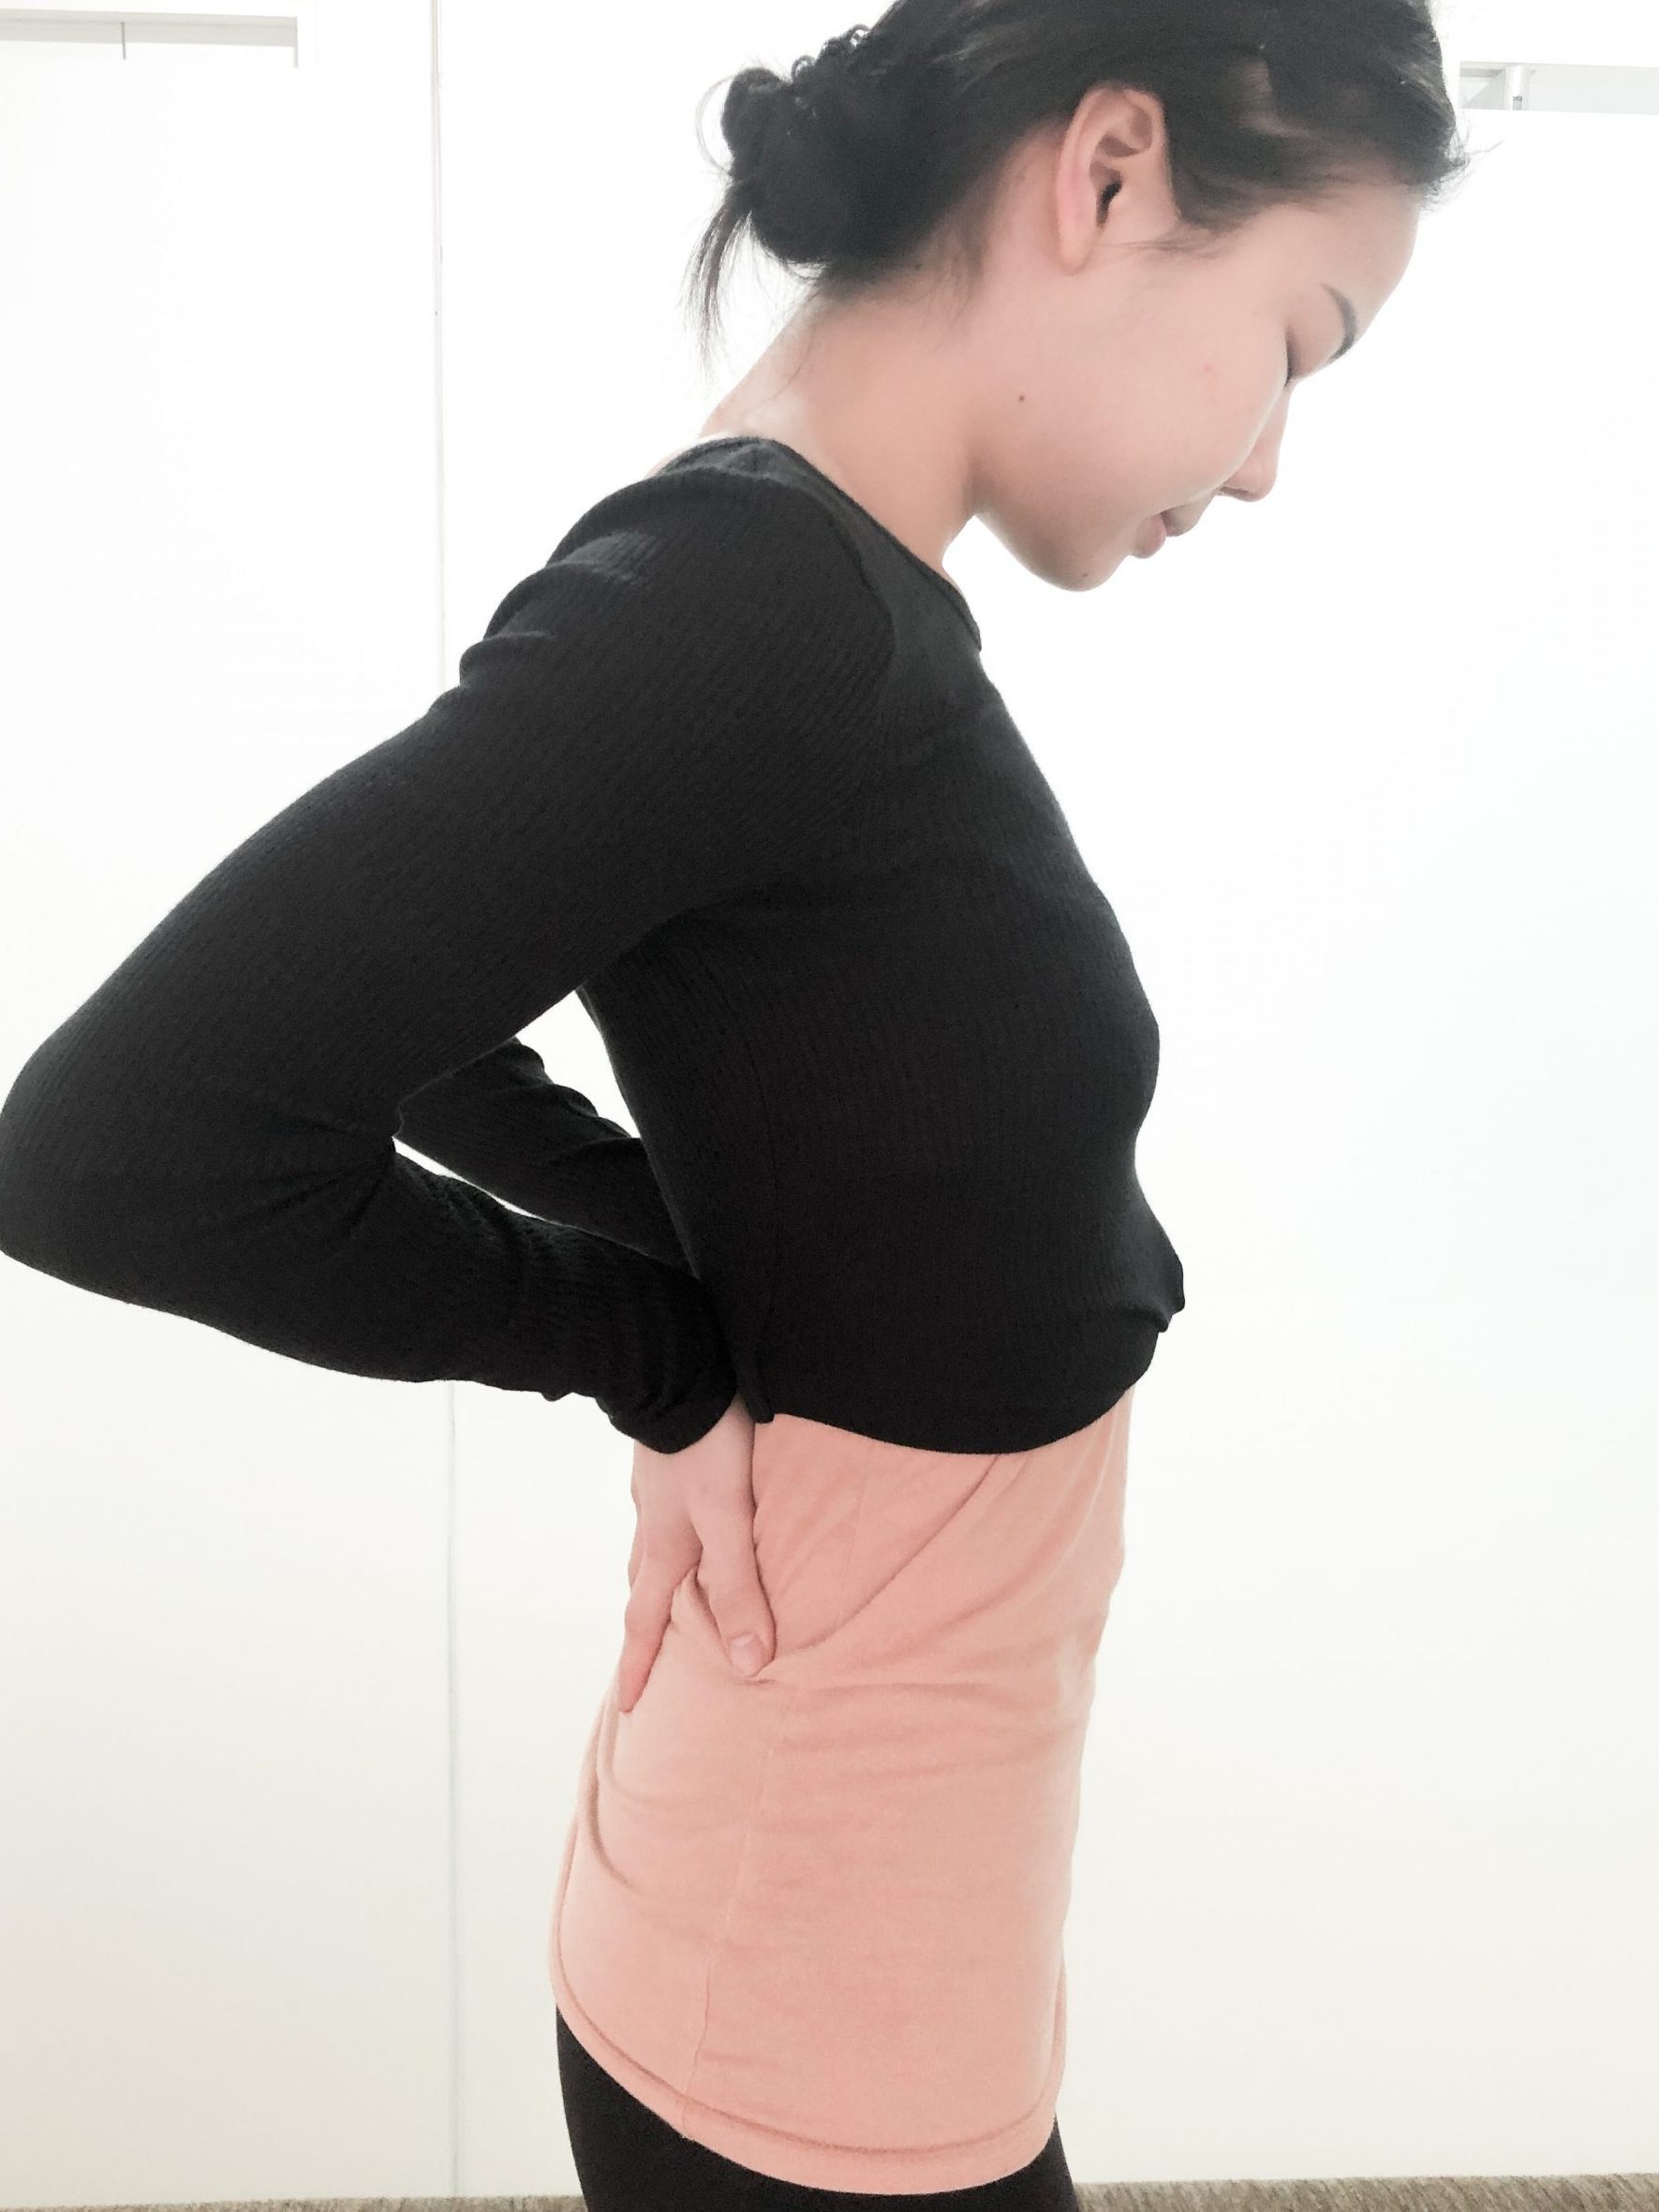 Women with back pain 